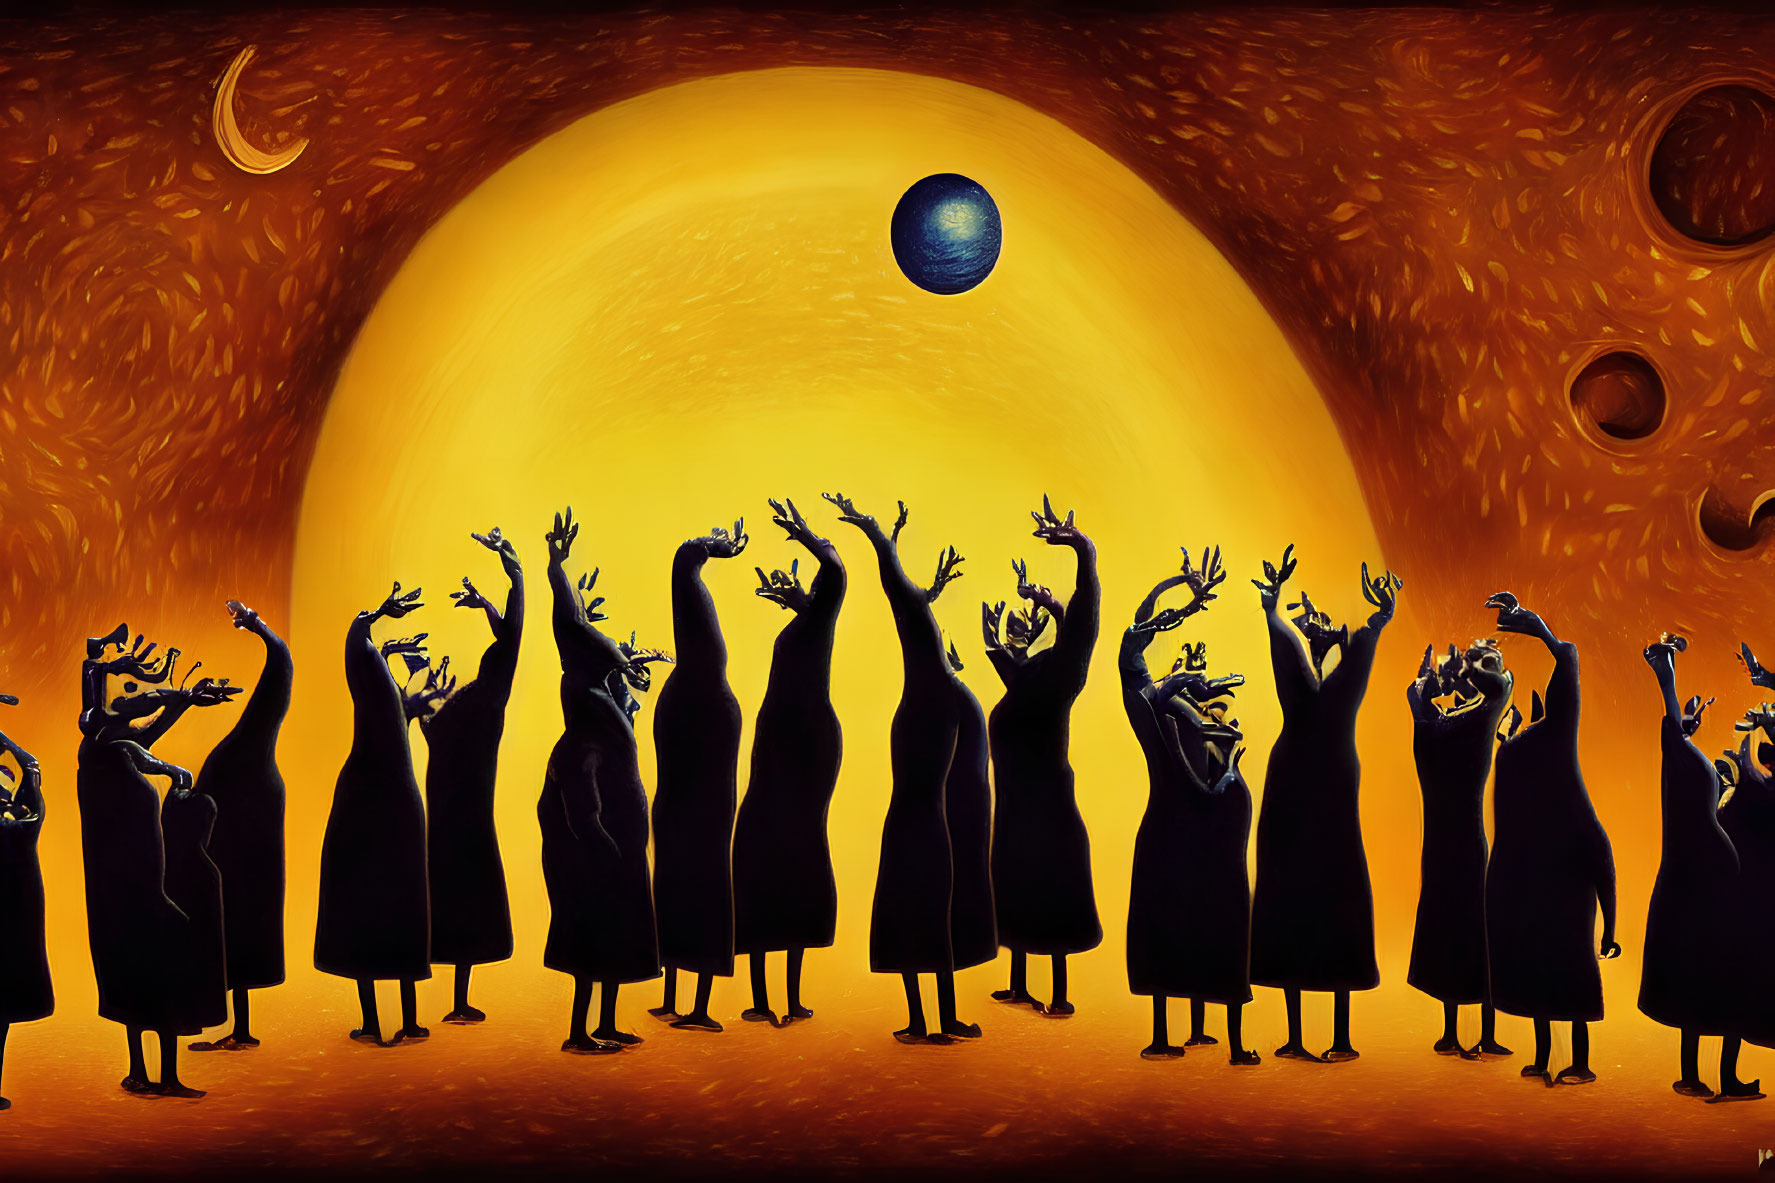 Surreal painting: robed figures, moon, celestial bodies in golden sky